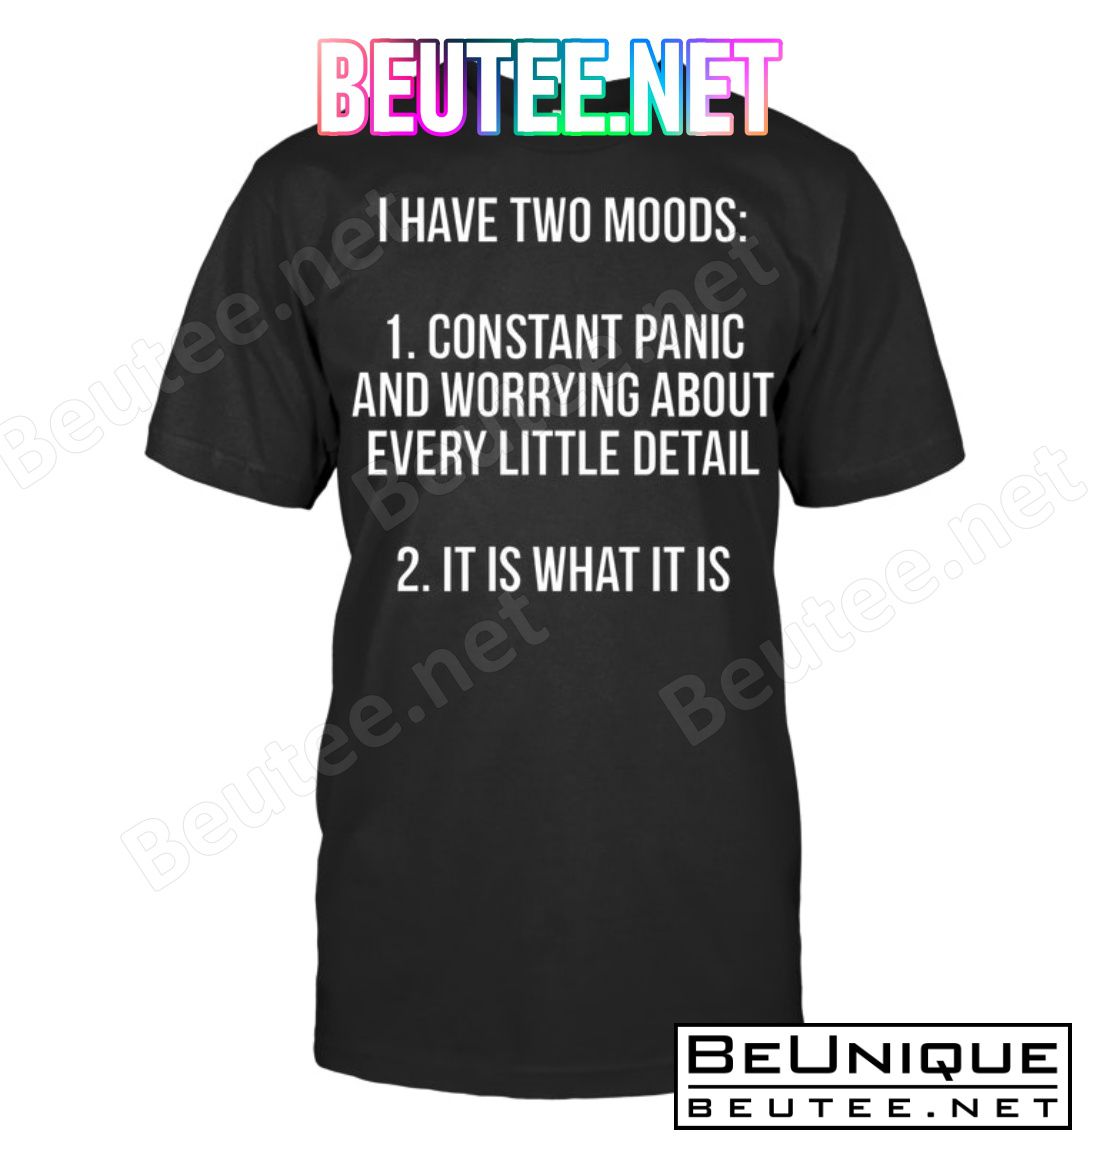 I Have Two Moods Constant Panic And Worrying About Every Little Detail It Is What It Is Shirt